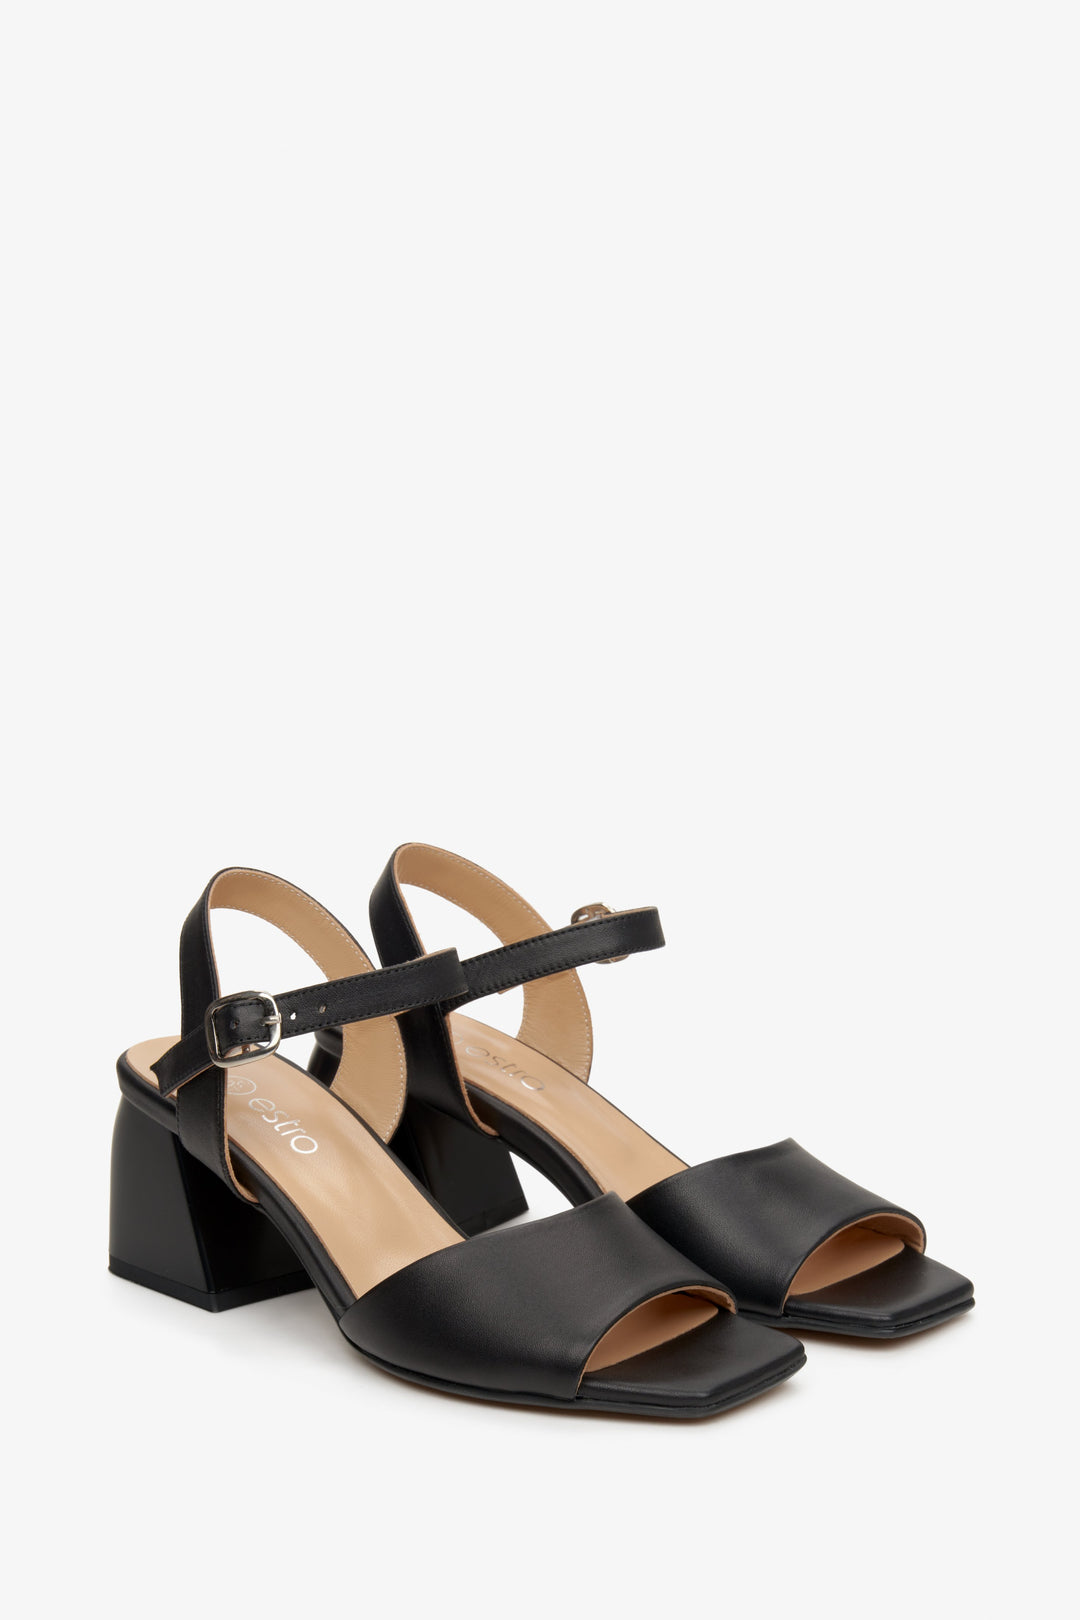 Women's black sandals made of genuine leather by Estro - presentation of shoe seams and toe cap.